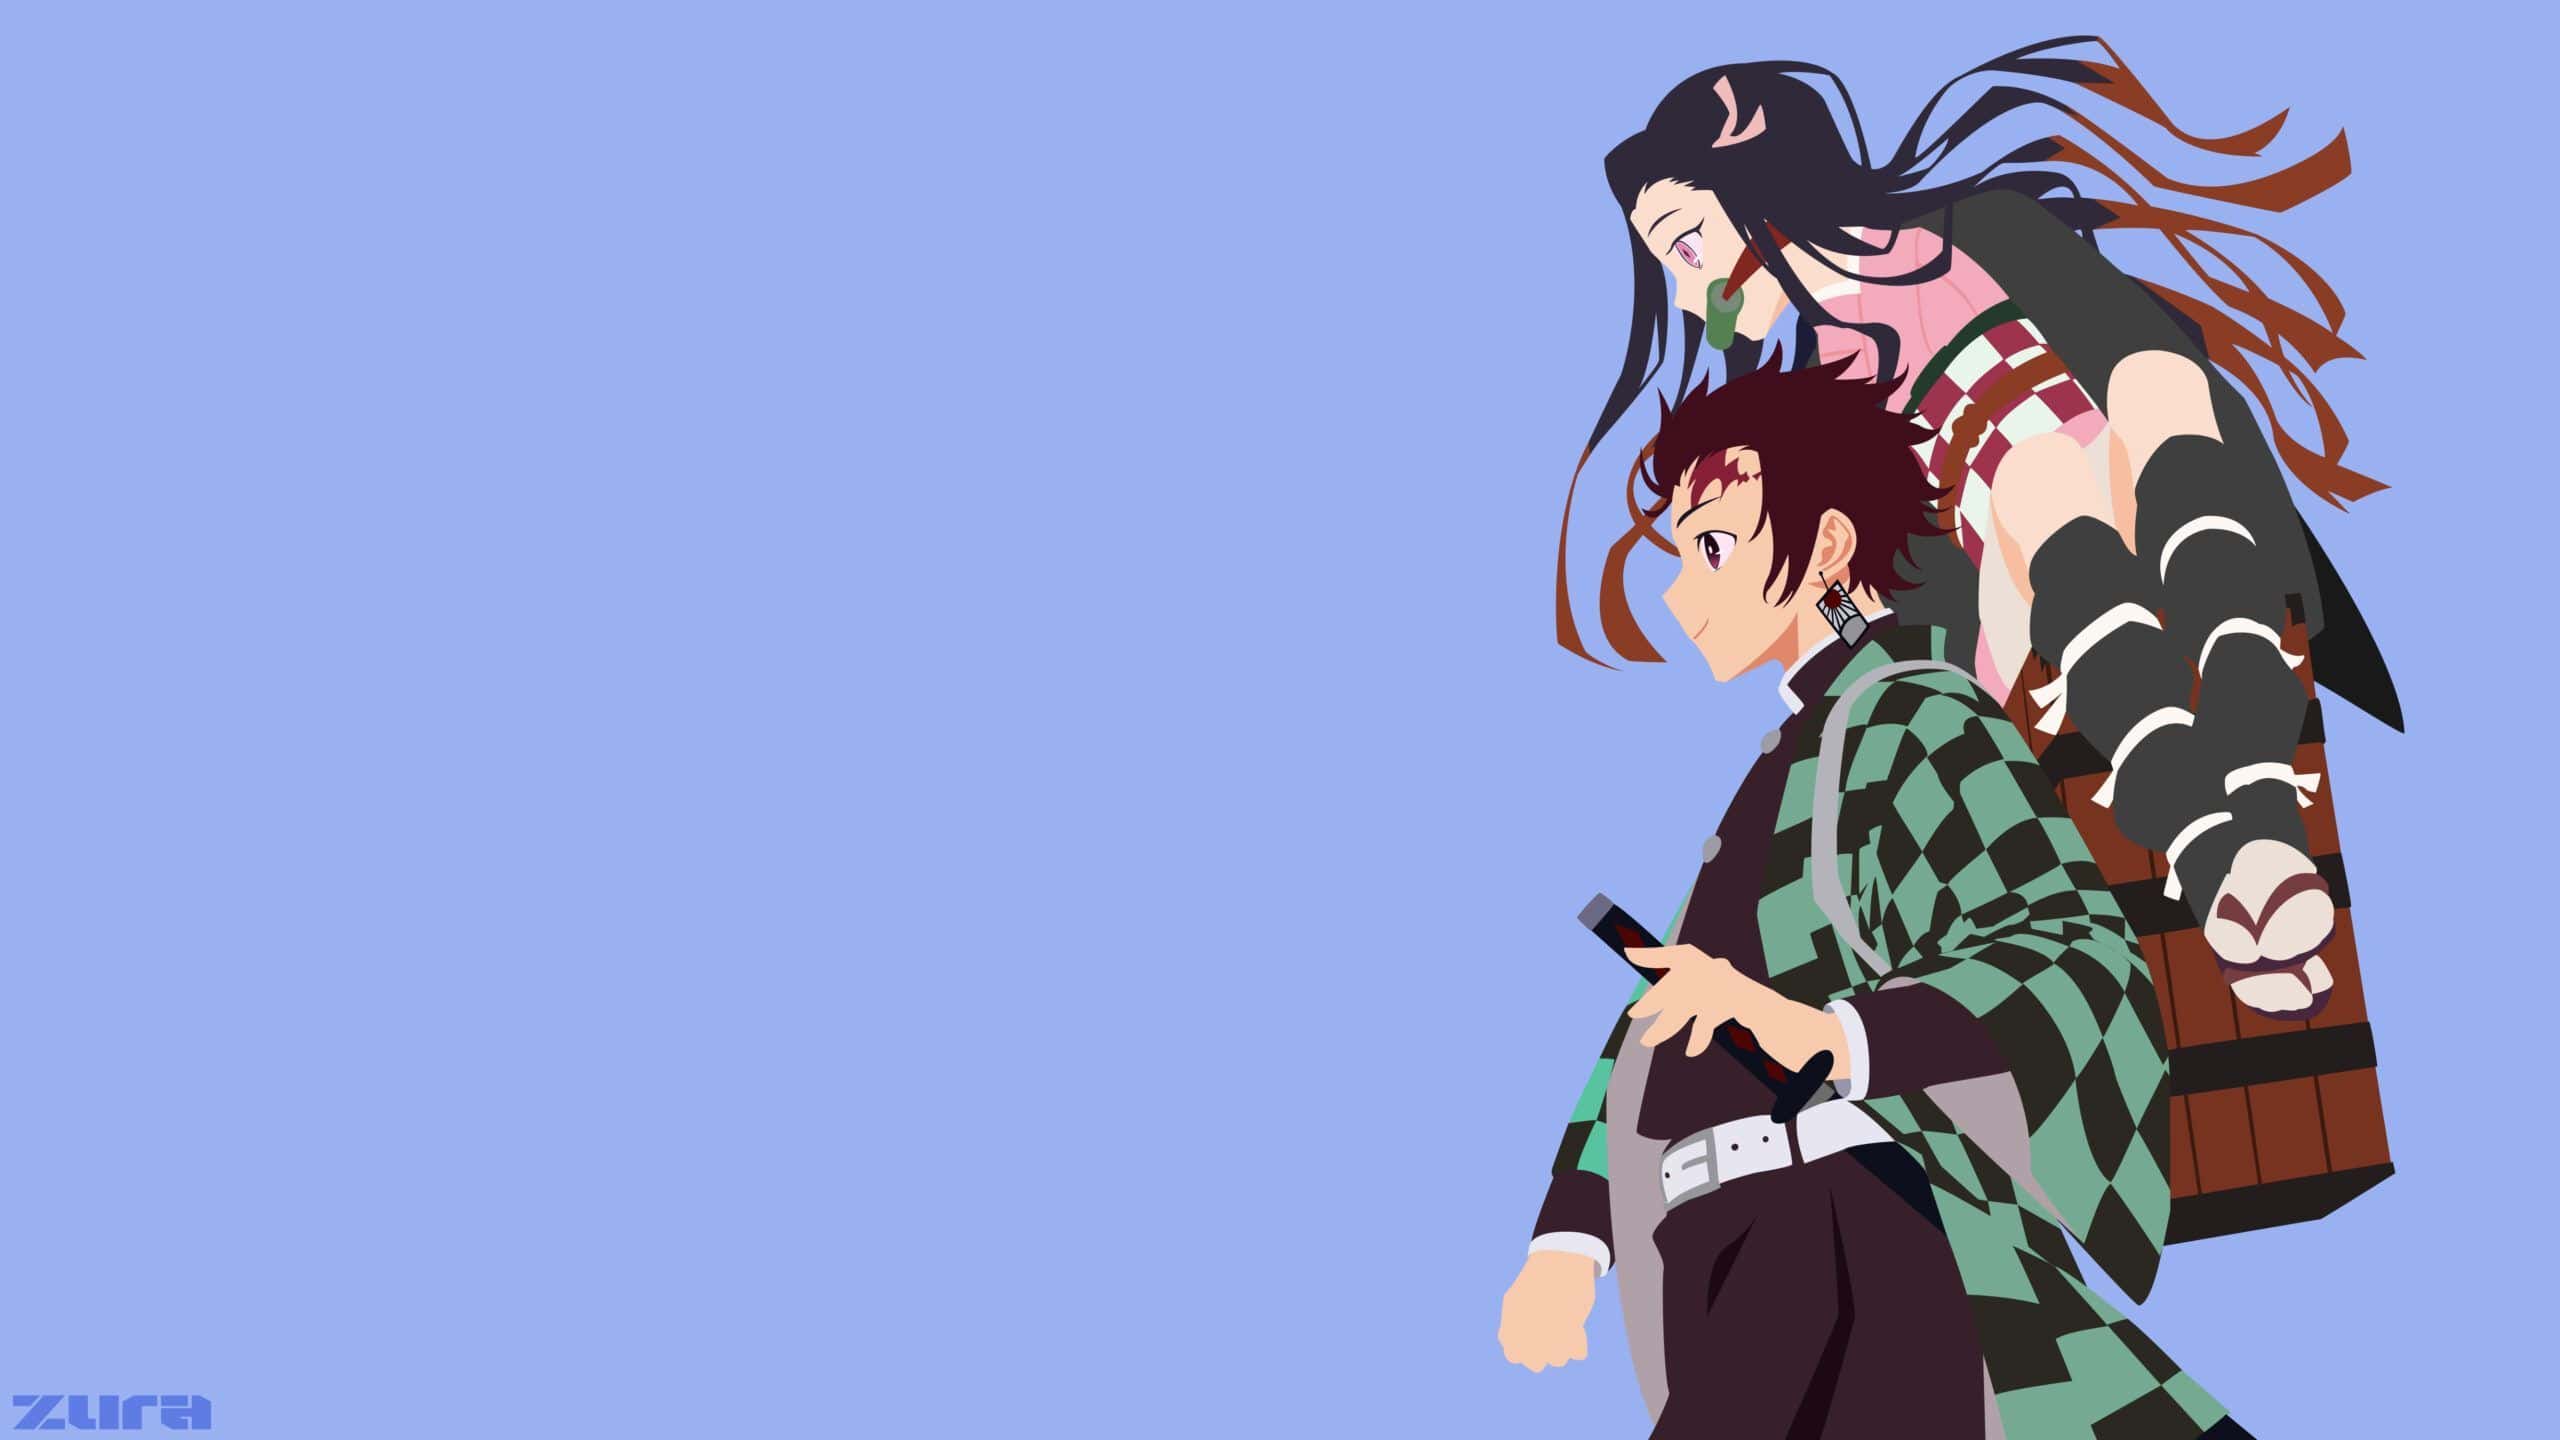 Anime wallpaper with a man and woman - Demon Slayer